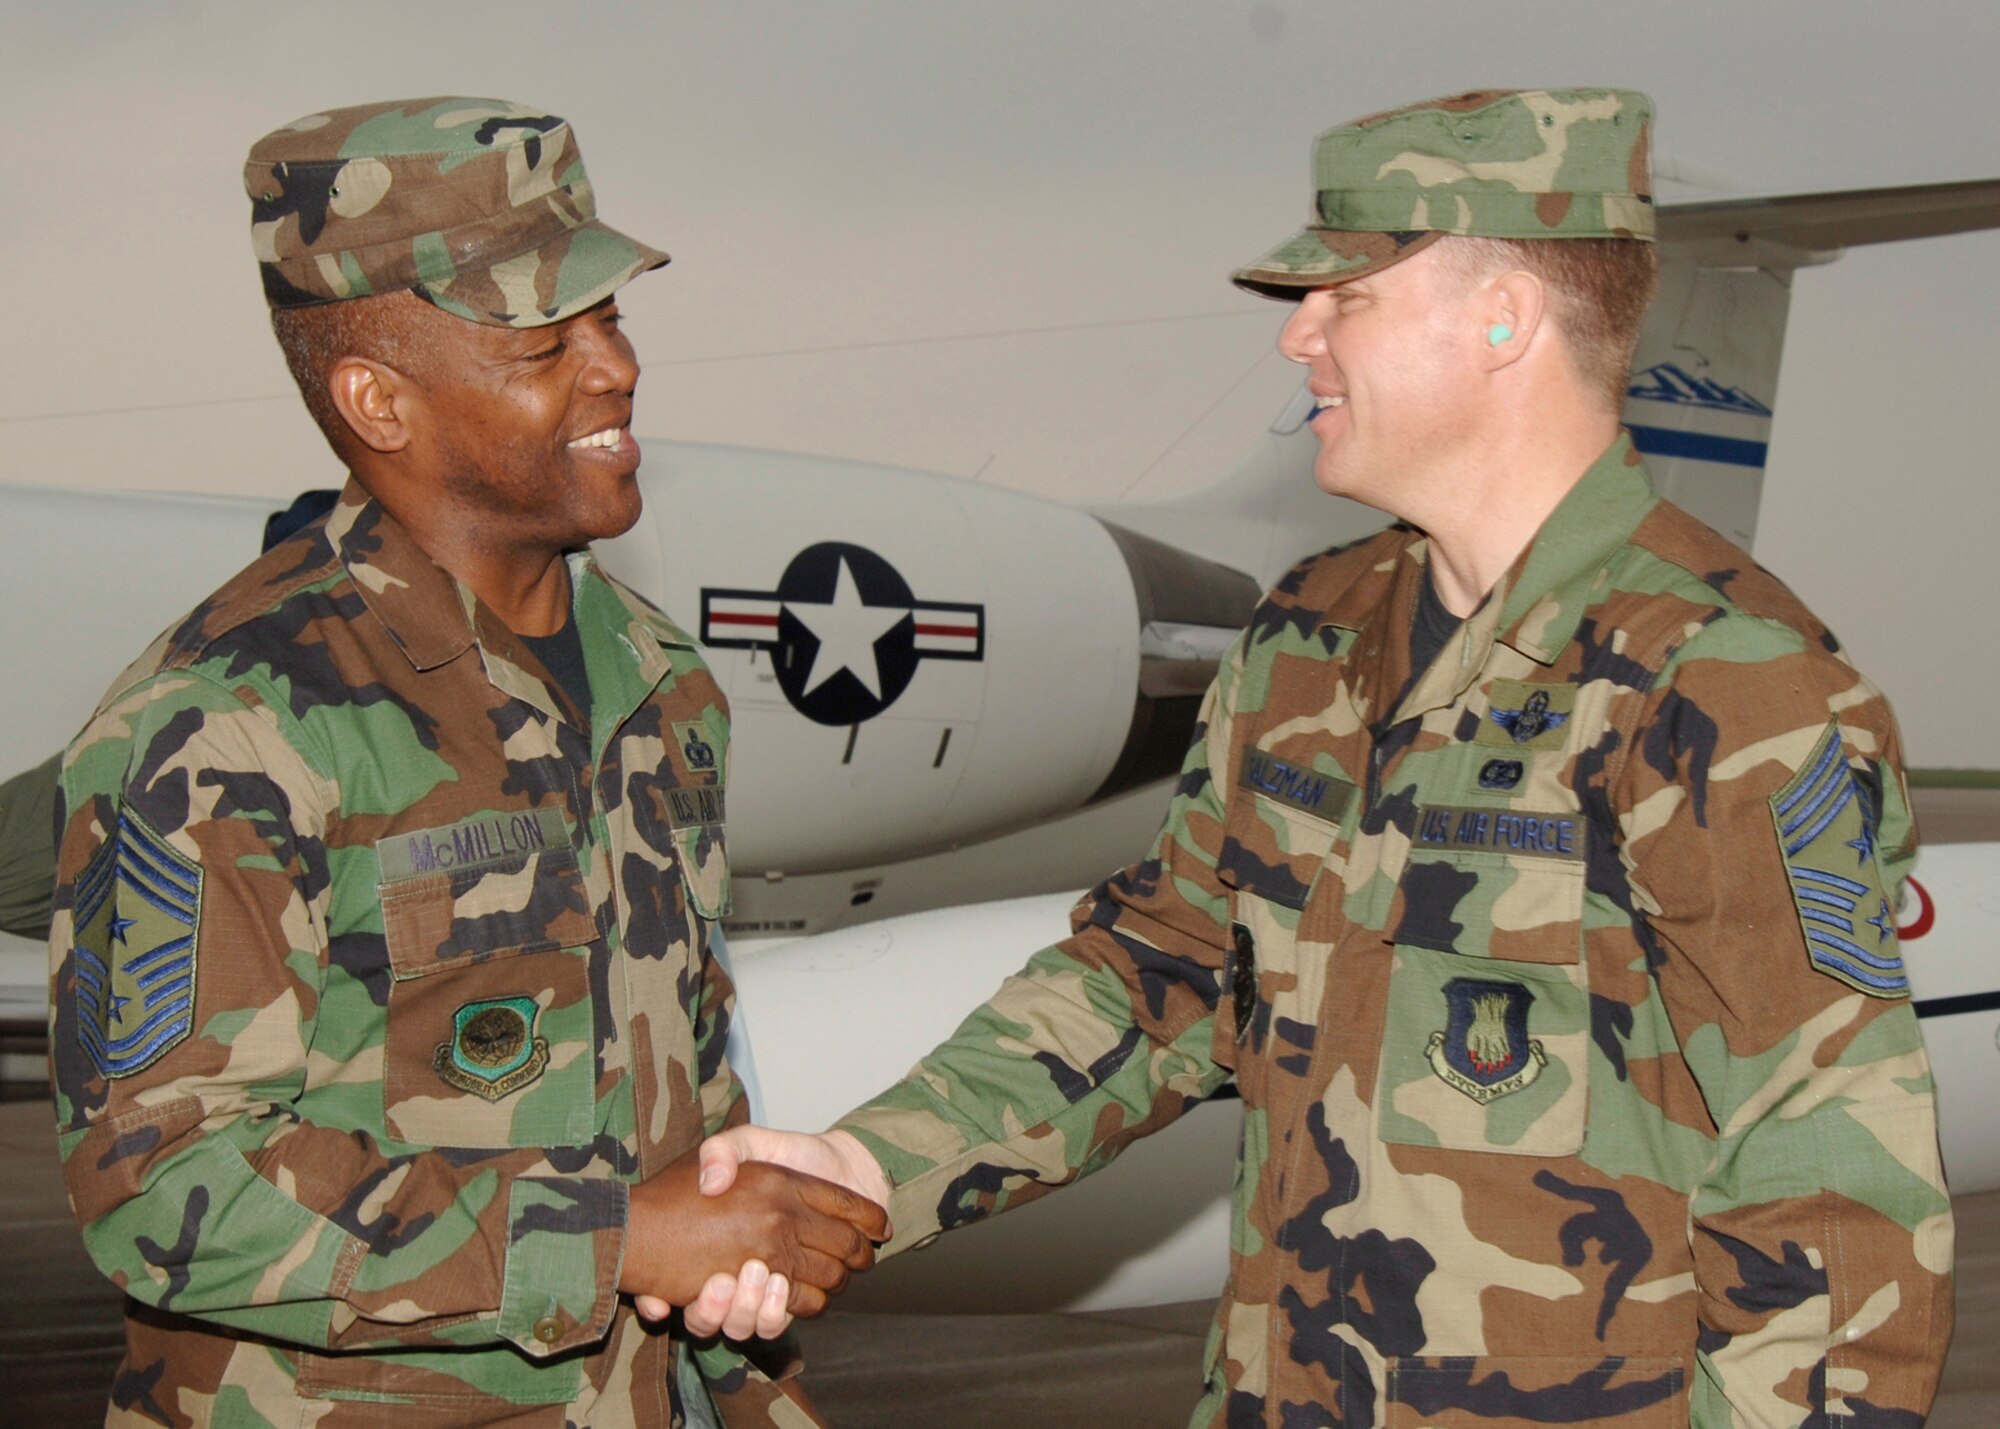 Chief Master Sgt. Todd Salzman, right, 22nd Air Refueling Wing command chief master sergeant, greets Chief Master Sgt. Brye McMillon, 18th Air Force command chief master sergeant, as he arrives at McConnell April 24. Chief McMillon accompanied Maj. Gen. James A. Hawkins, 18th Air Force commander, and the general’s wife, Linda, as they visited McConnell from Scott Air Force Base, Ill., April 24 to 26. (Photo by Airman 1st Class Jessica Corob)